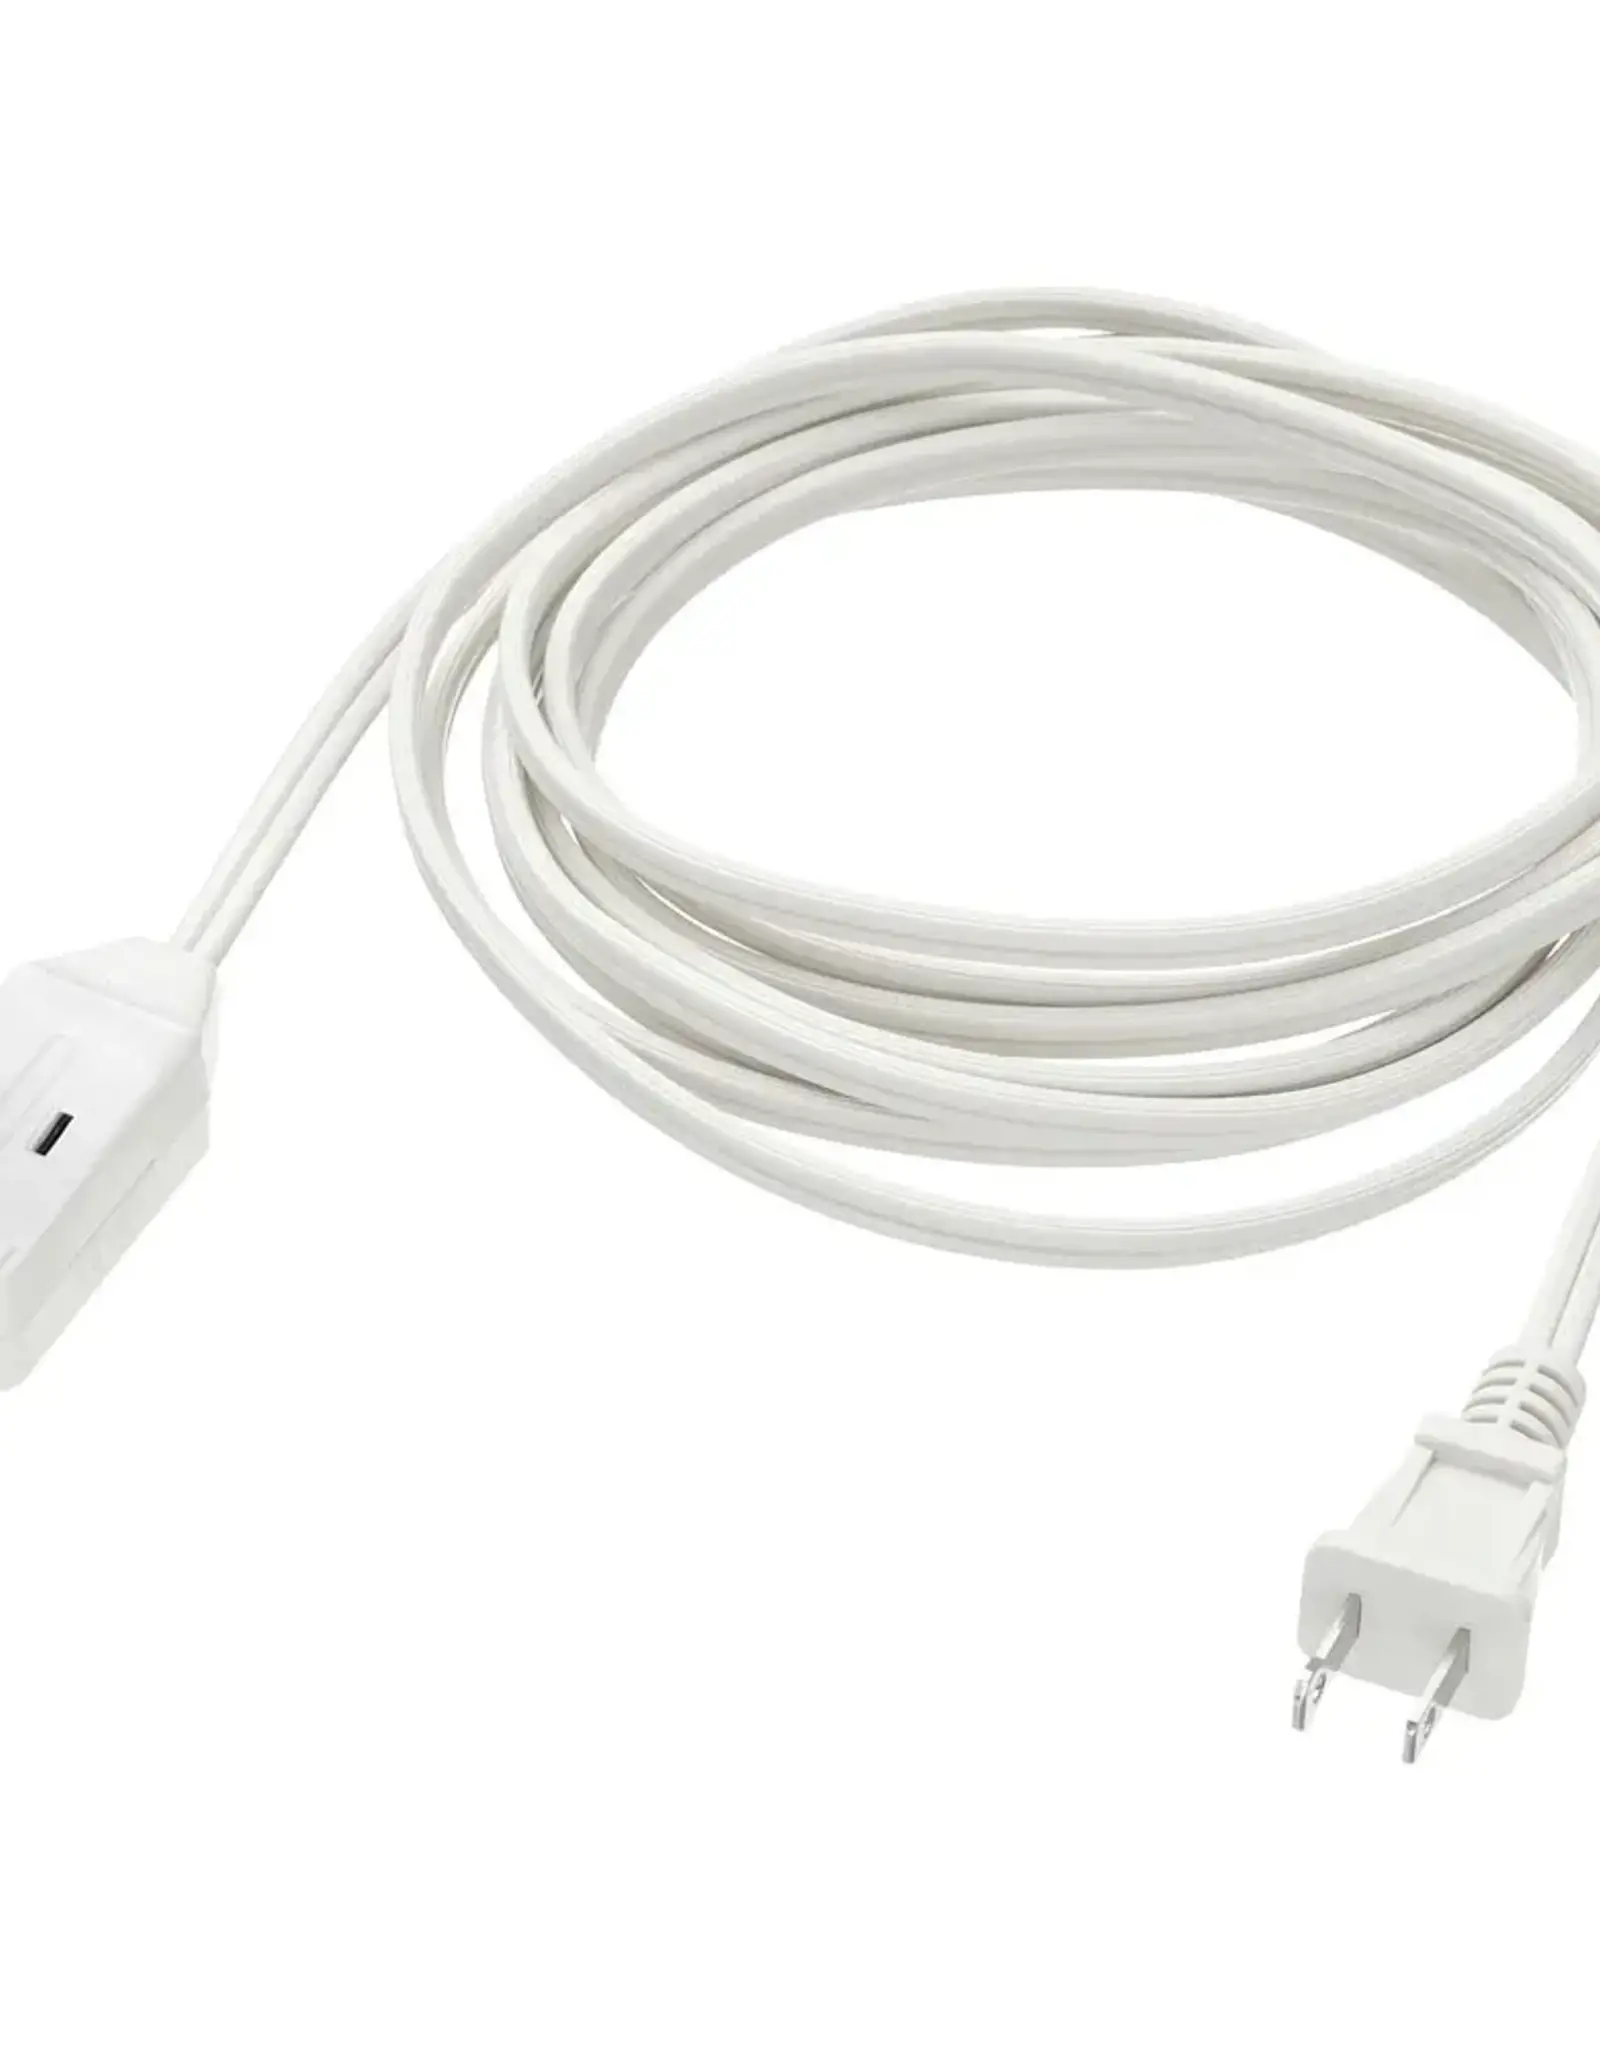 3 Outlet Extension Cord - 6ft